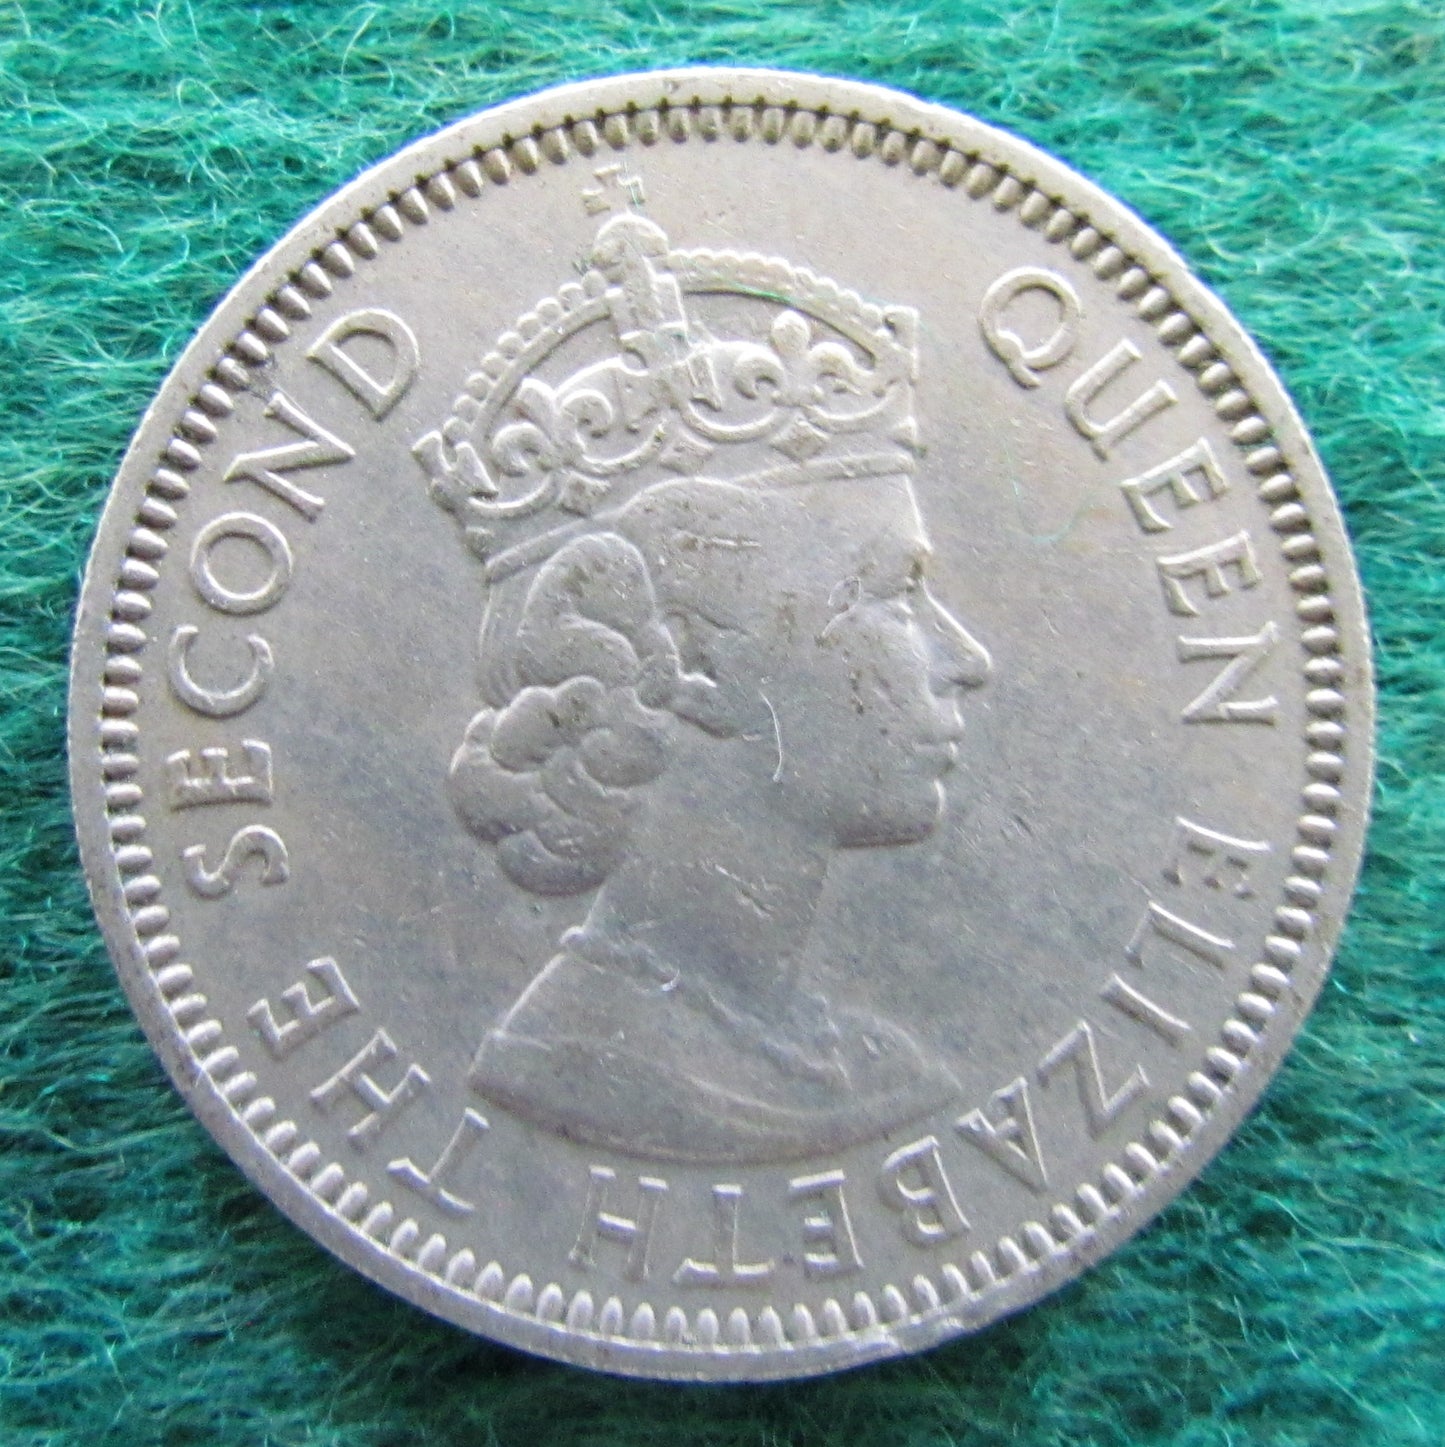 British Caribbean Territories Eastern Group 1957 25 Cent Queen Elizabeth II Coin - Circulated